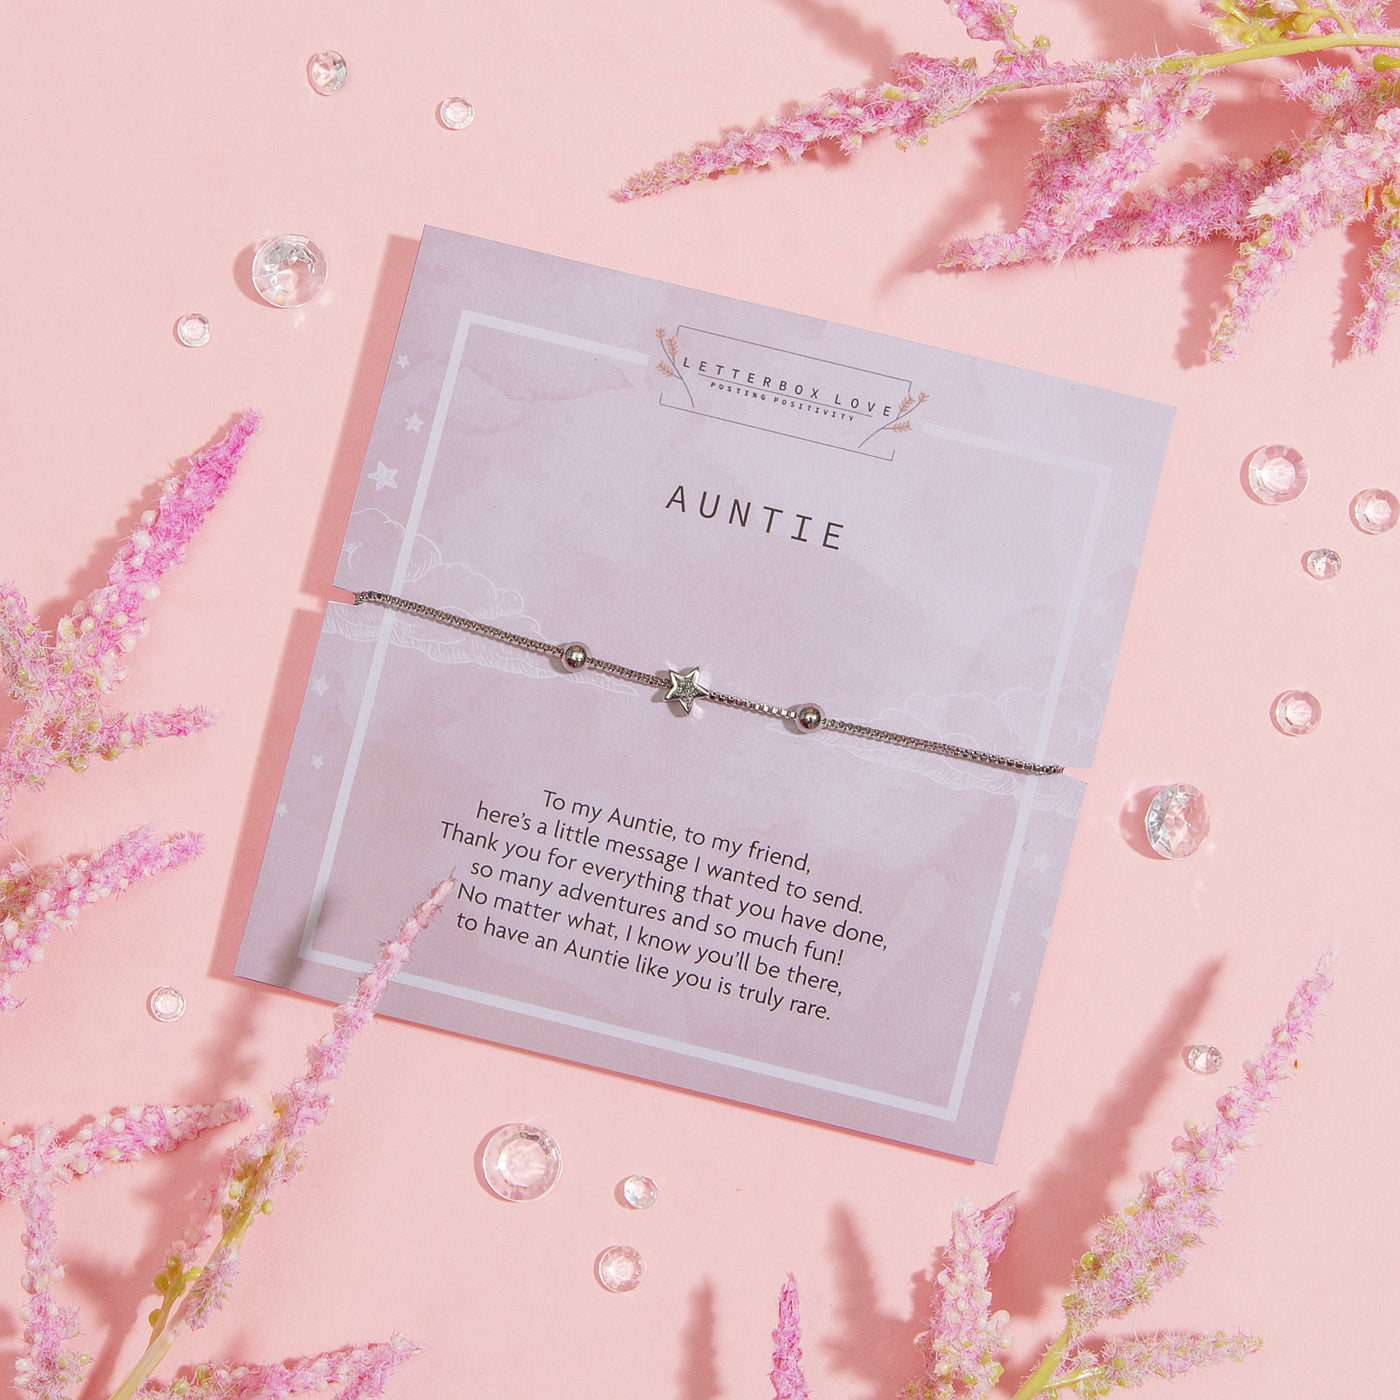 A heartwarming greeting card dedicated to 'Auntie'. The card features a thoughtful message expressing gratitude and admiration. Above the written sentiment is a delicate silver bracelet with a star charm, elegantly placed on the card.